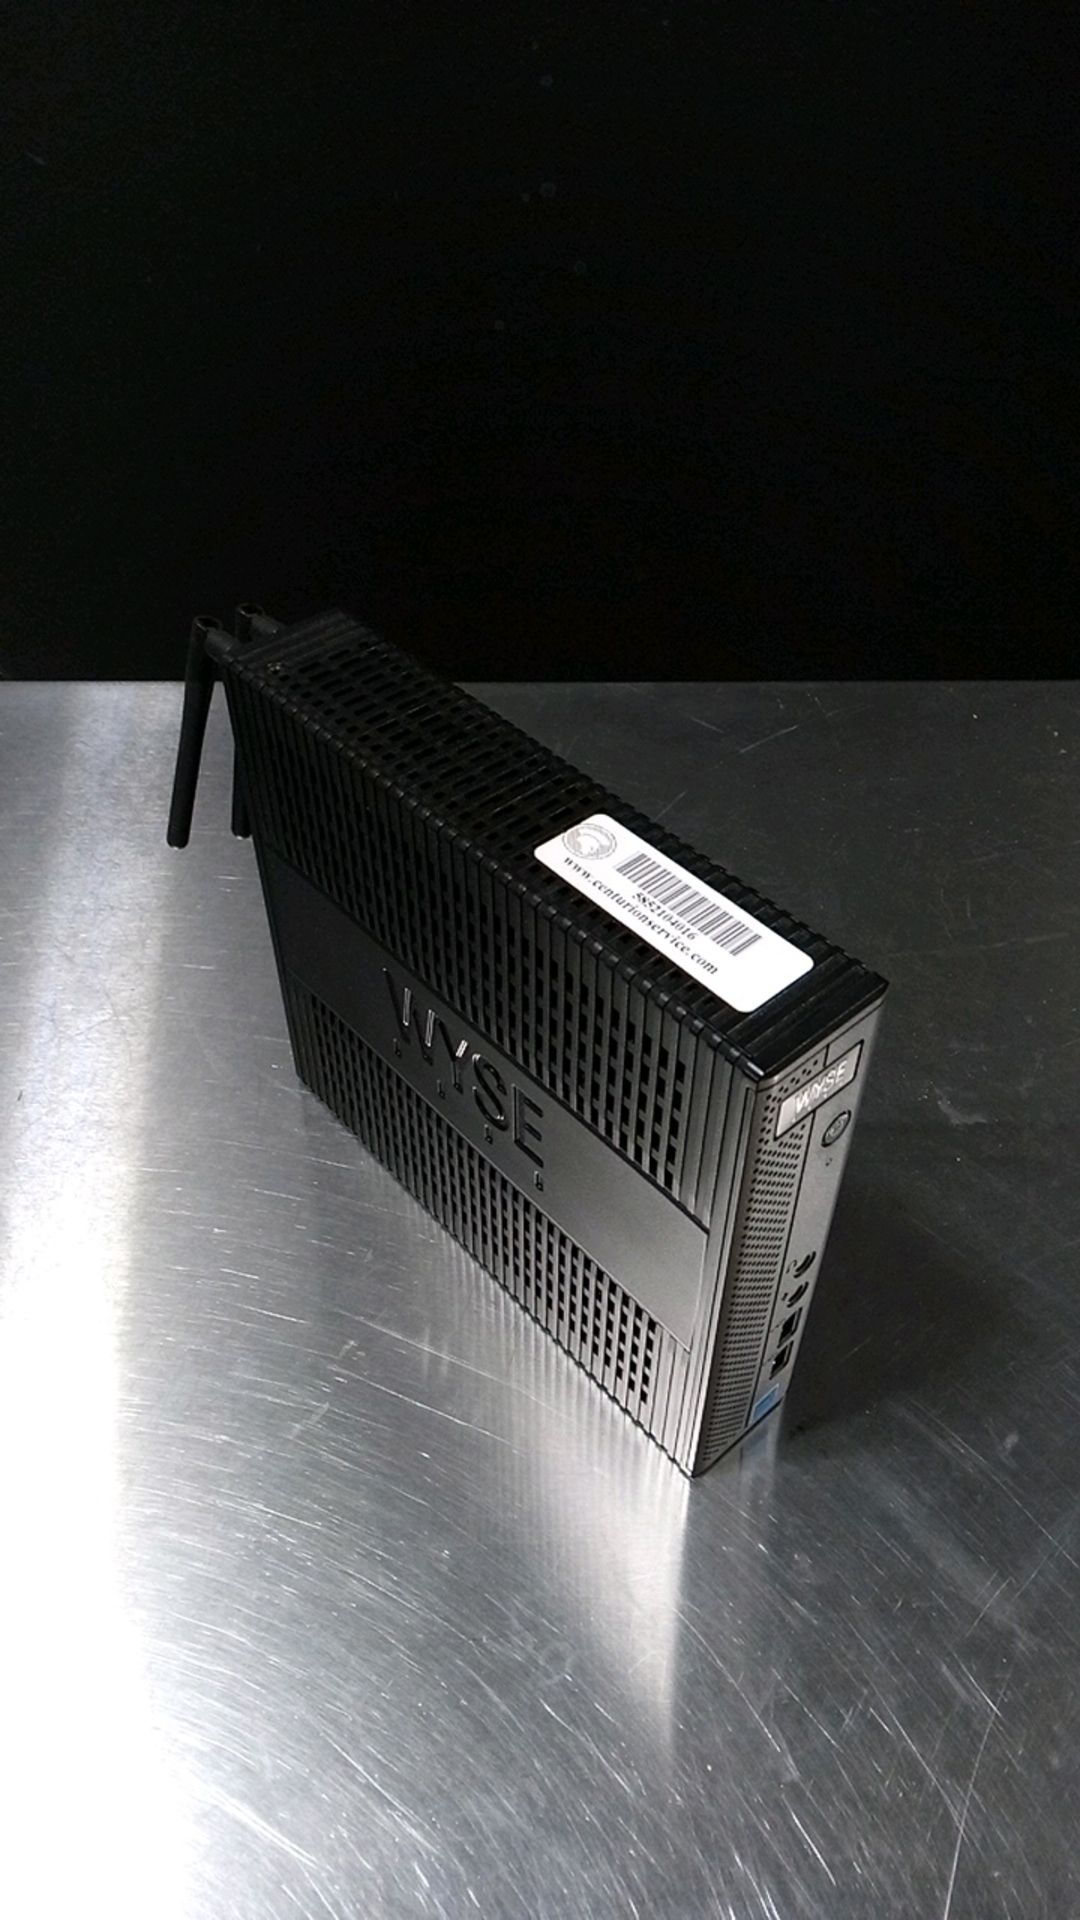 DELL ZX0 THIN CLIENT LOCATED AT: 2440 GREENLEAF AVE, ELK GROVE VILLAGE IL